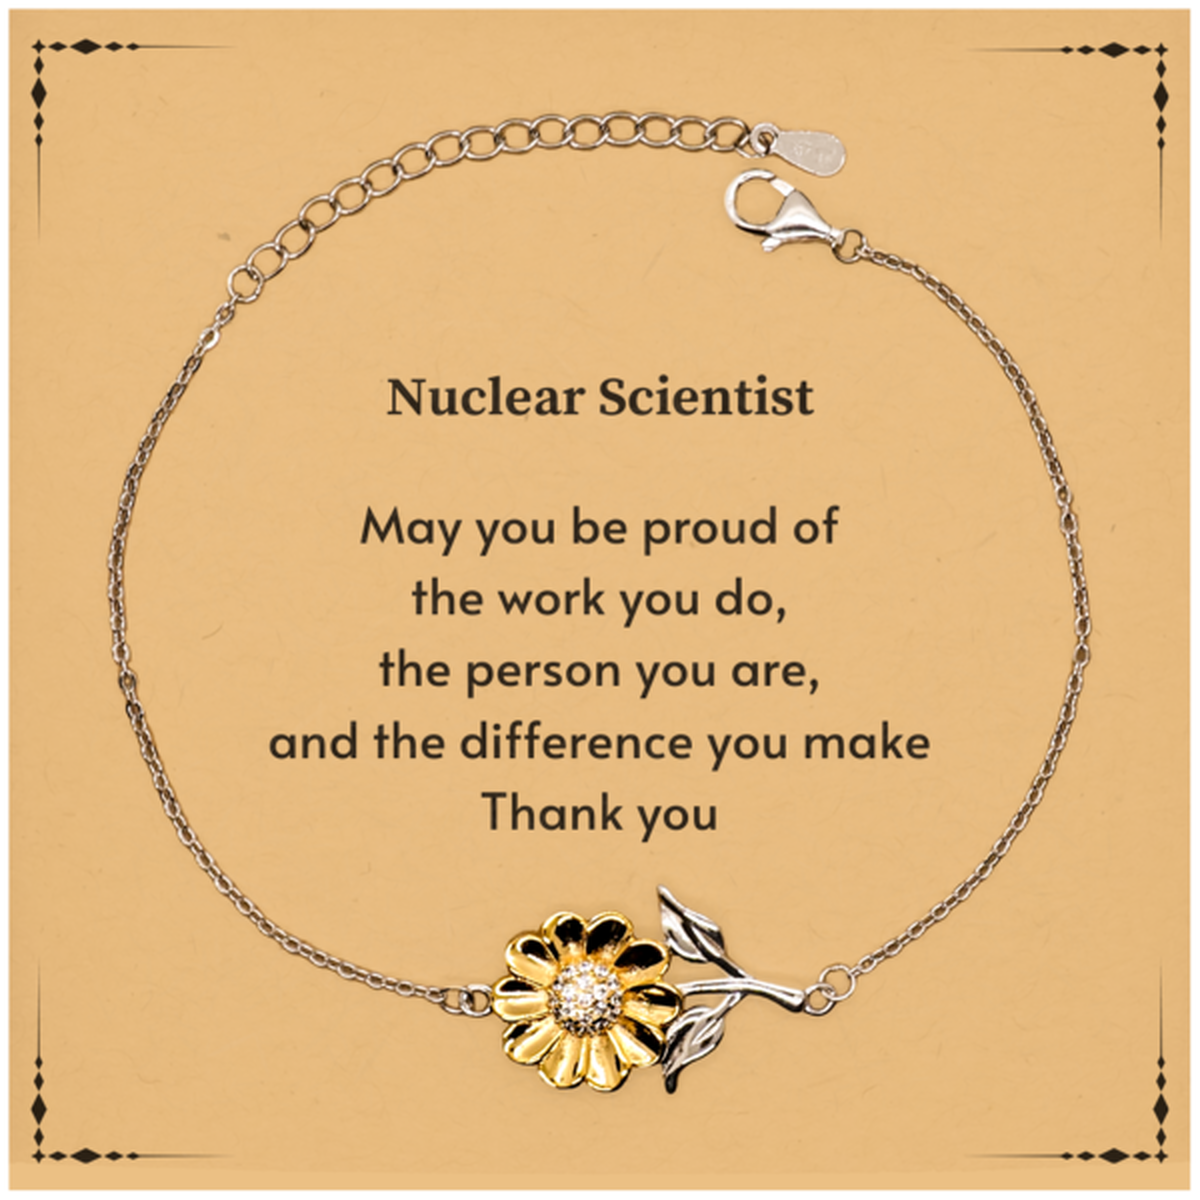 Heartwarming Sunflower Bracelet Retirement Coworkers Gifts for Nuclear Scientist, Nuclear Scientist May You be proud of the work you do, the person you are Gifts for Boss Men Women Friends